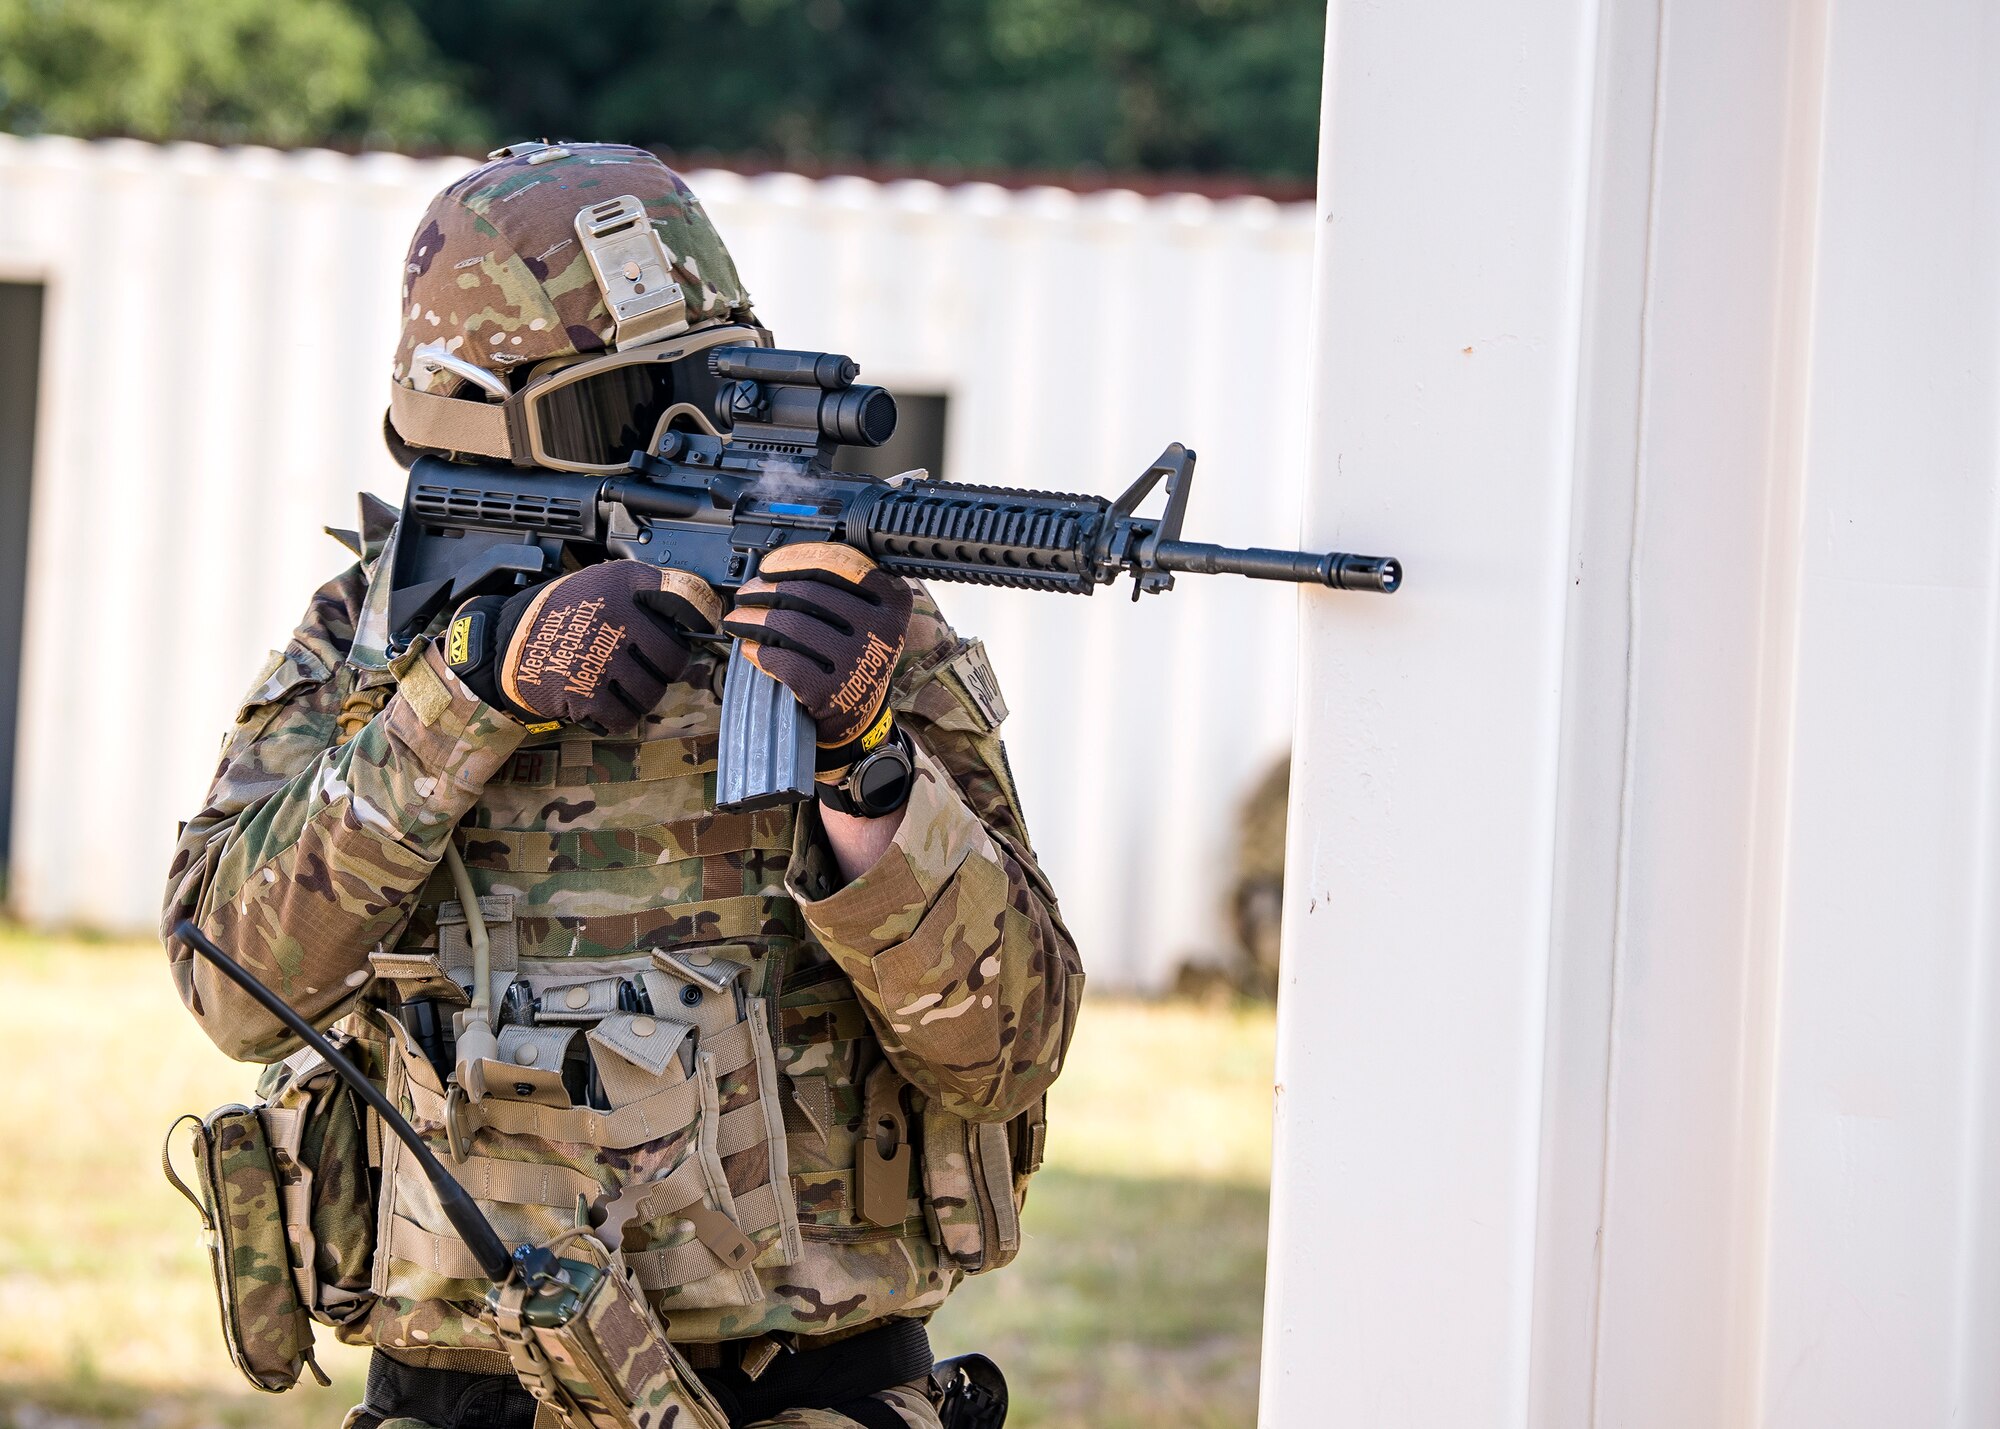 Staff Sgt. Austin Buckhalter, 3d Weather Squadron weather forecaster, fires an M4 Carbine during a certification field exercise (CFX), July 29, 2019, at Camp Bowie Training Center, Texas. The CFX was designed to evaluate the squadron’s overall tactical ability and readiness to provide the U.S. Army with full spectrum environmental support to the Joint Task Force (JTF) fight. The CFX immersed Airmen into all the aspects of what could come with a deployment such as force on force scenarios. (U.S. Air Force photo by Airman 1st Class Eugene Oliver)